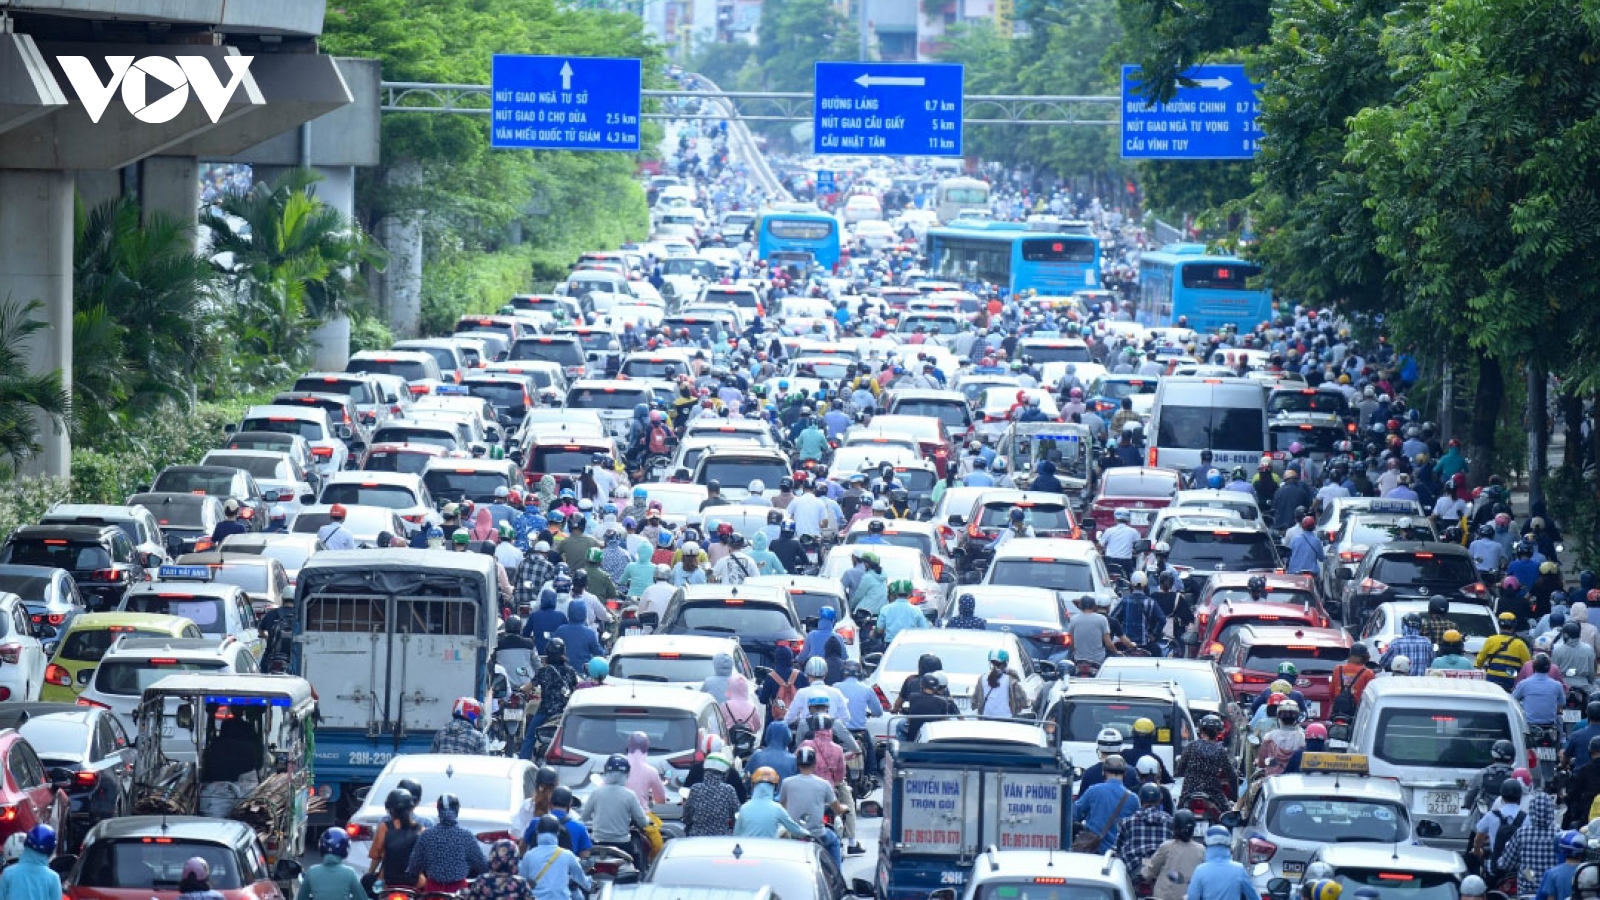 Hanoi suffers heavy traffic jams after easing of COVID-19 restrictions